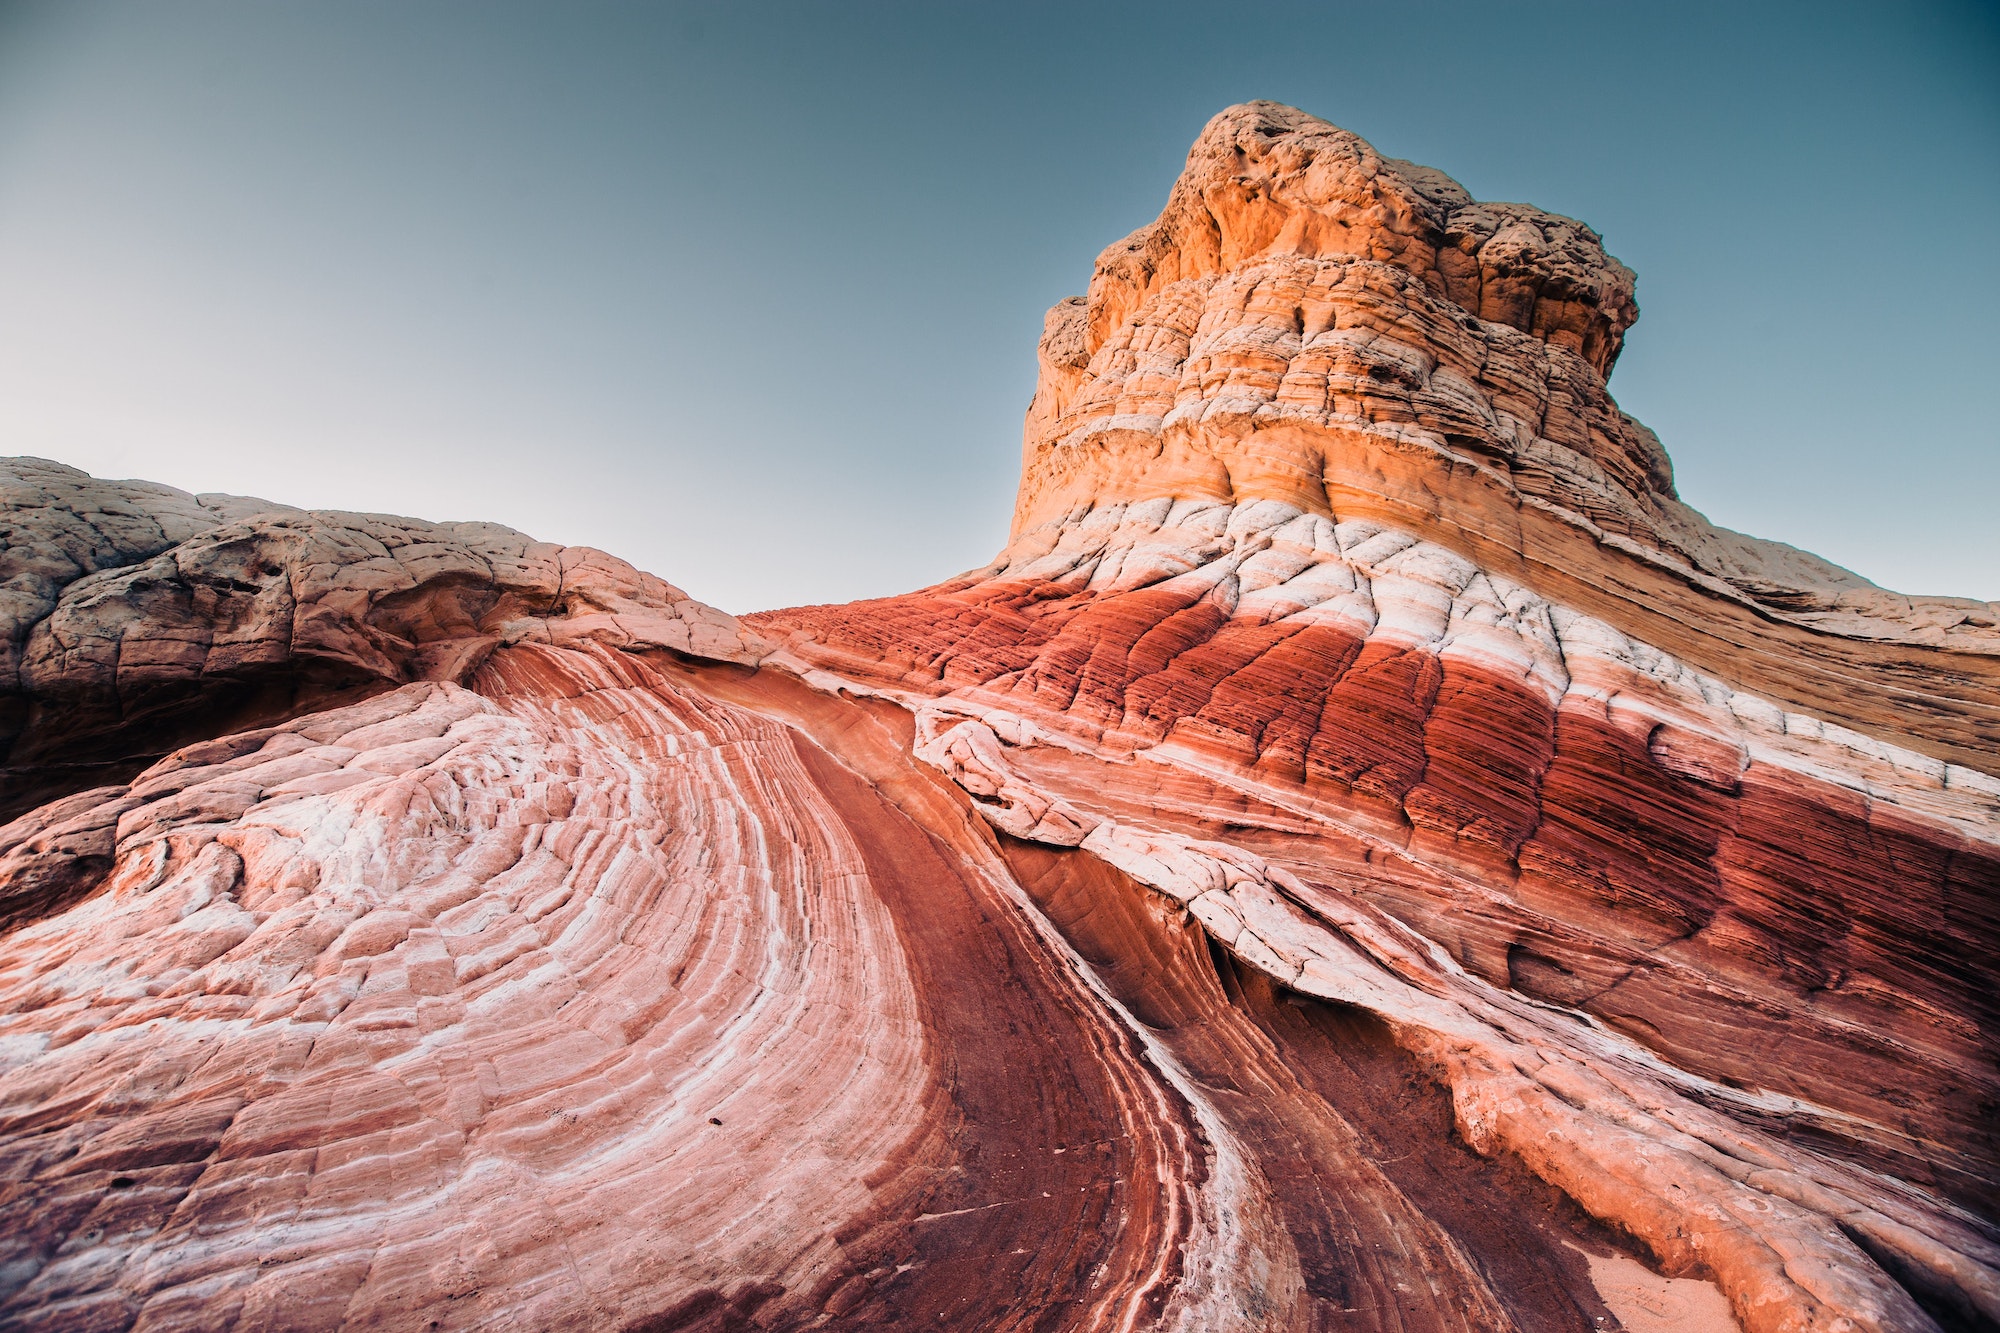 Beautiful rock formations in Vermilion Cliffs National Monument. White Pocket, Arizona, USA.